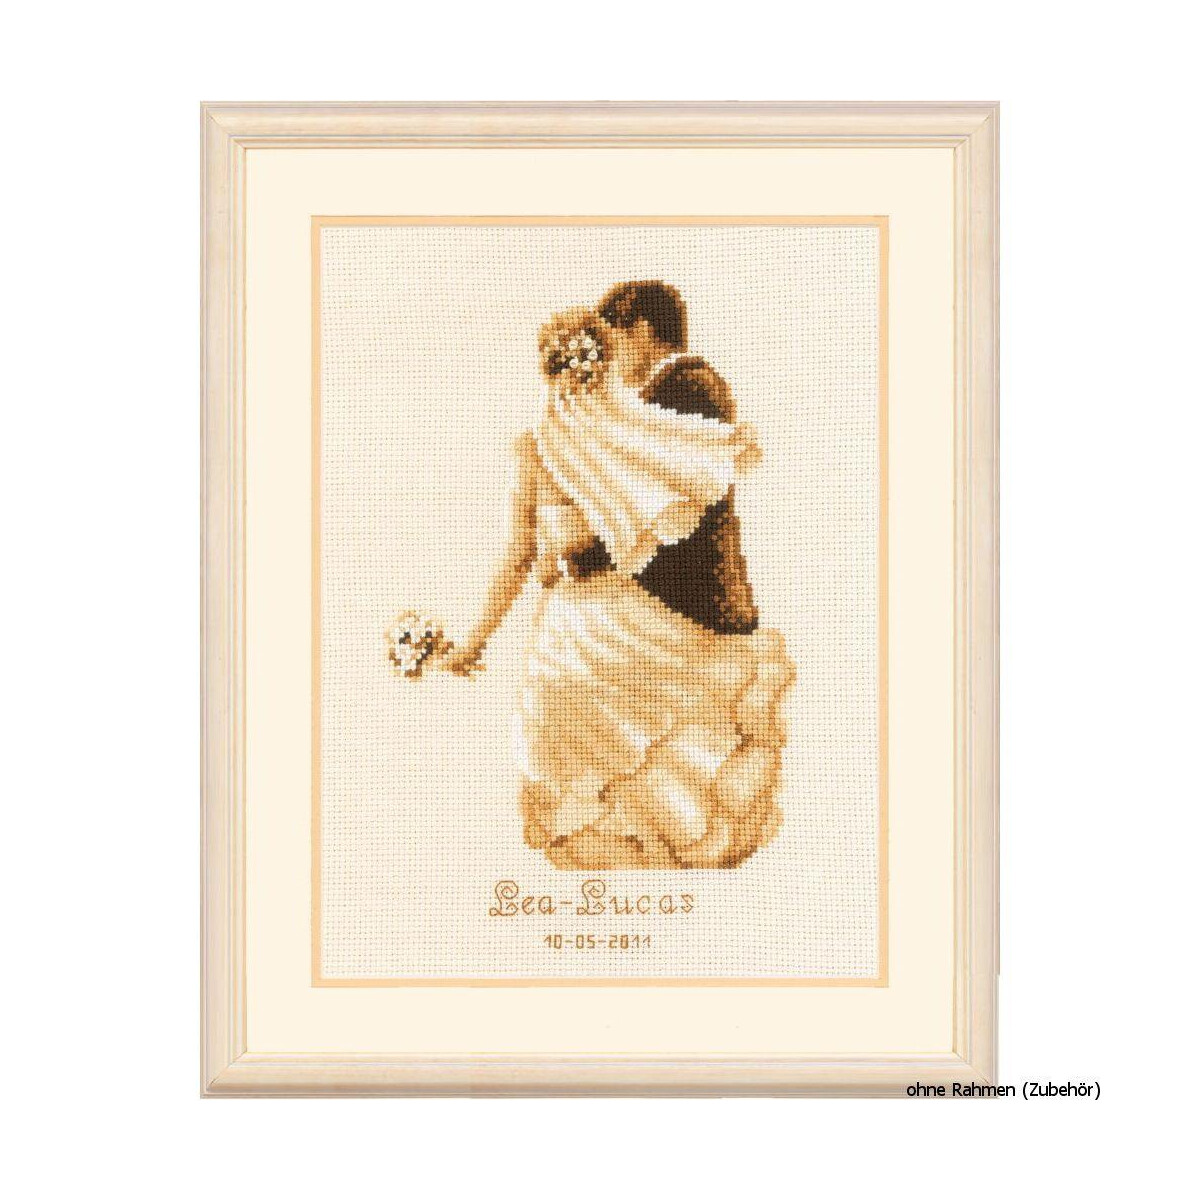 Vervaco Counted cross stitch kit Newlyweds, DIY